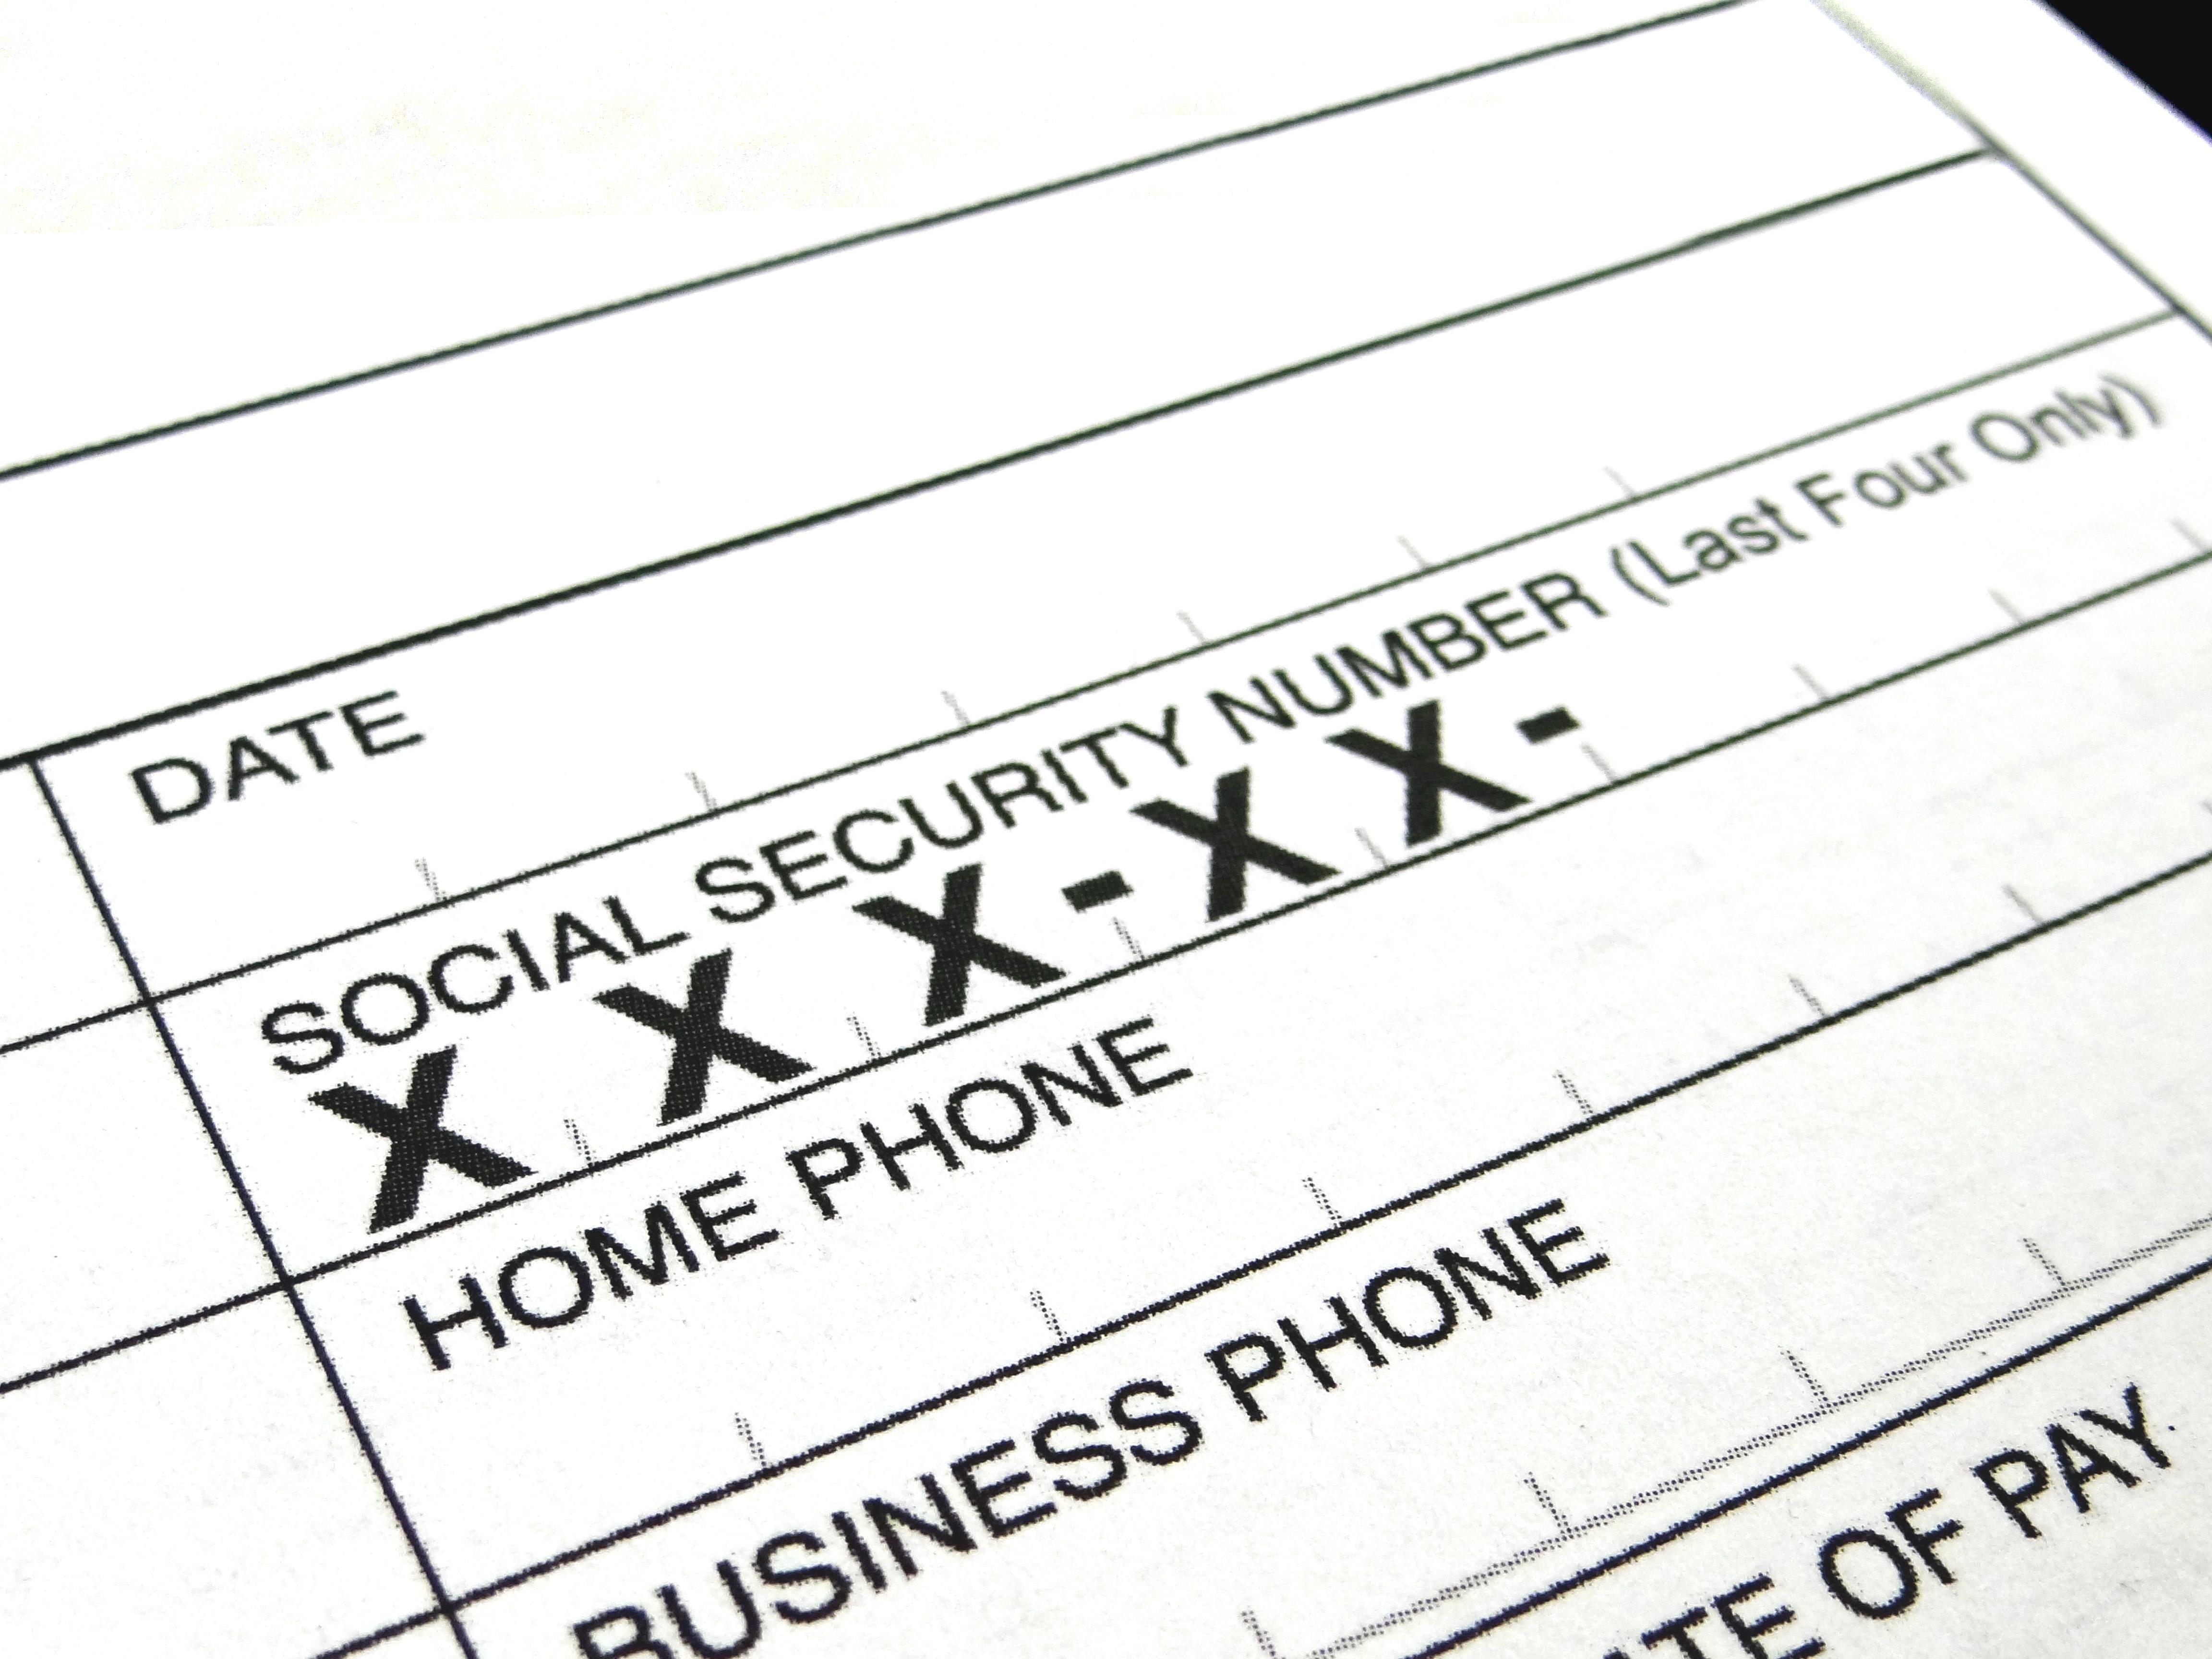 Social Security numbers